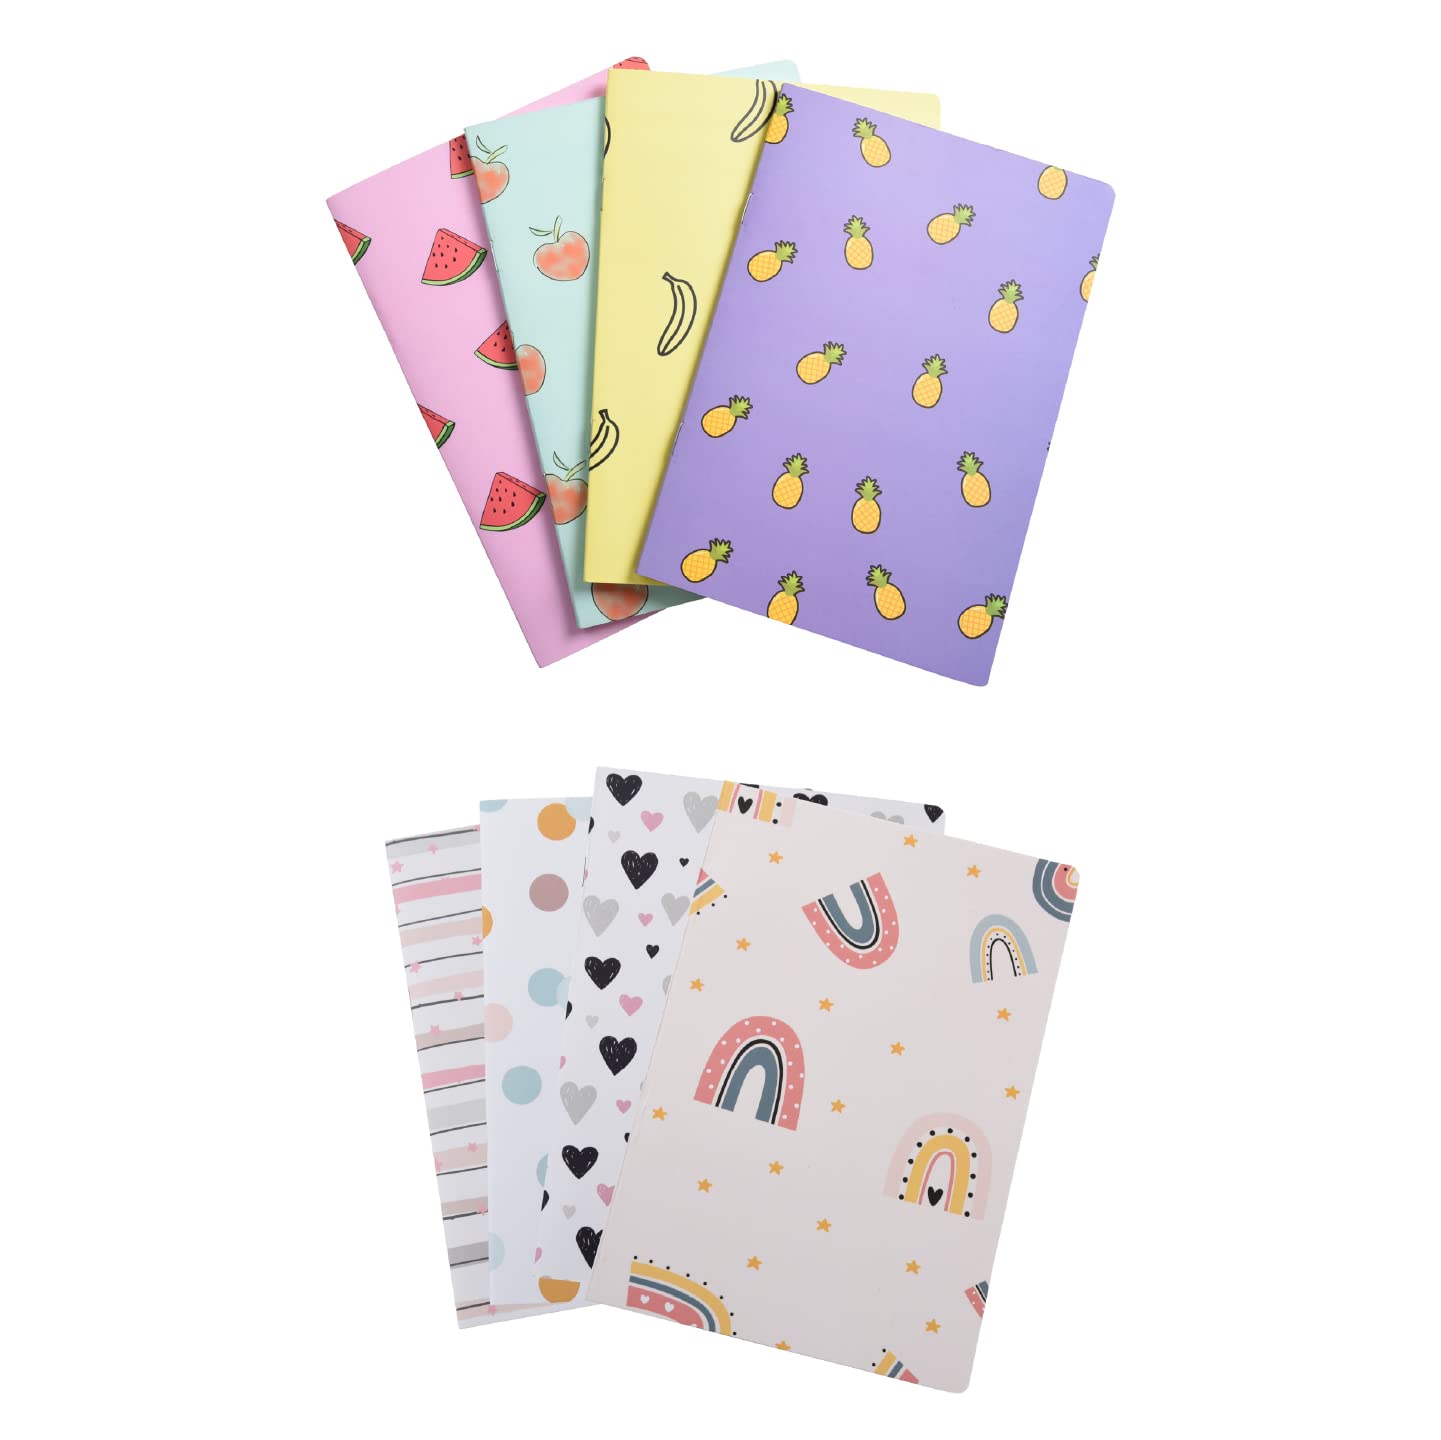 Papboo A5 Unicorn Soft Bound  Plain Notebook(Matte Finished Cover,120 pages,80 GSM, Round Edge) (Copy)